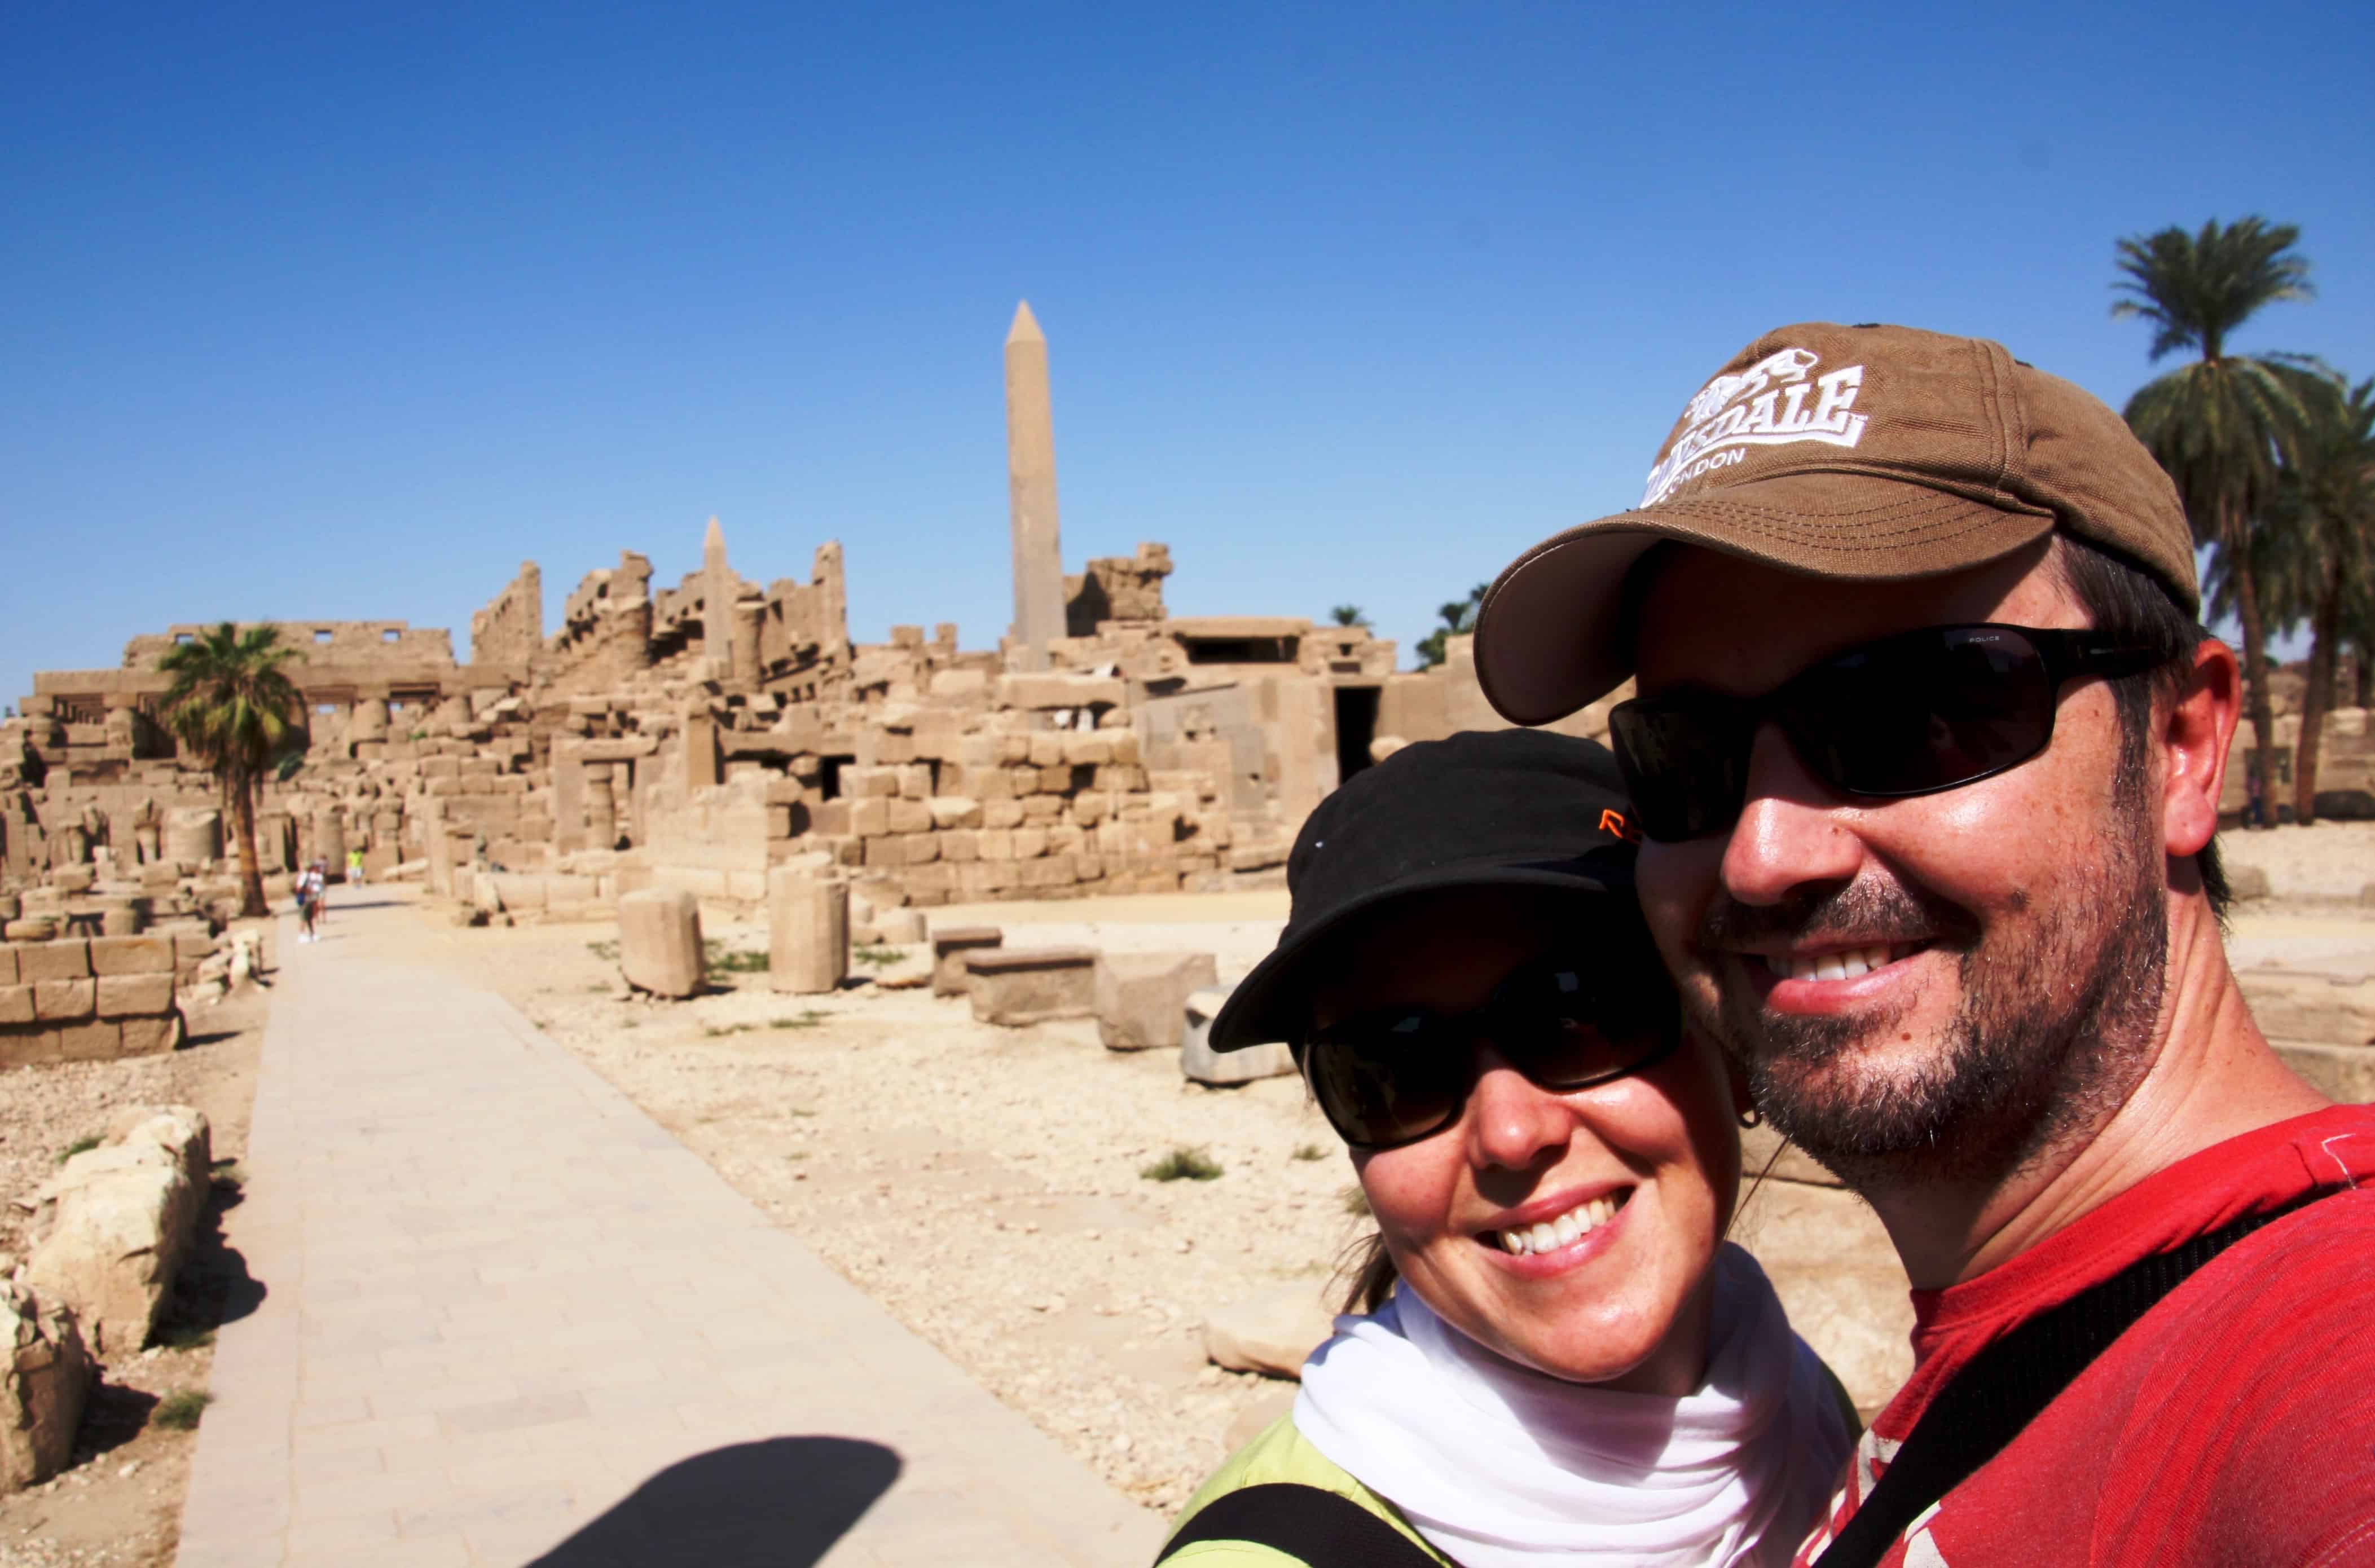 Couple smiles in front of the ruins of the great Temples of Karnak in Egypt.